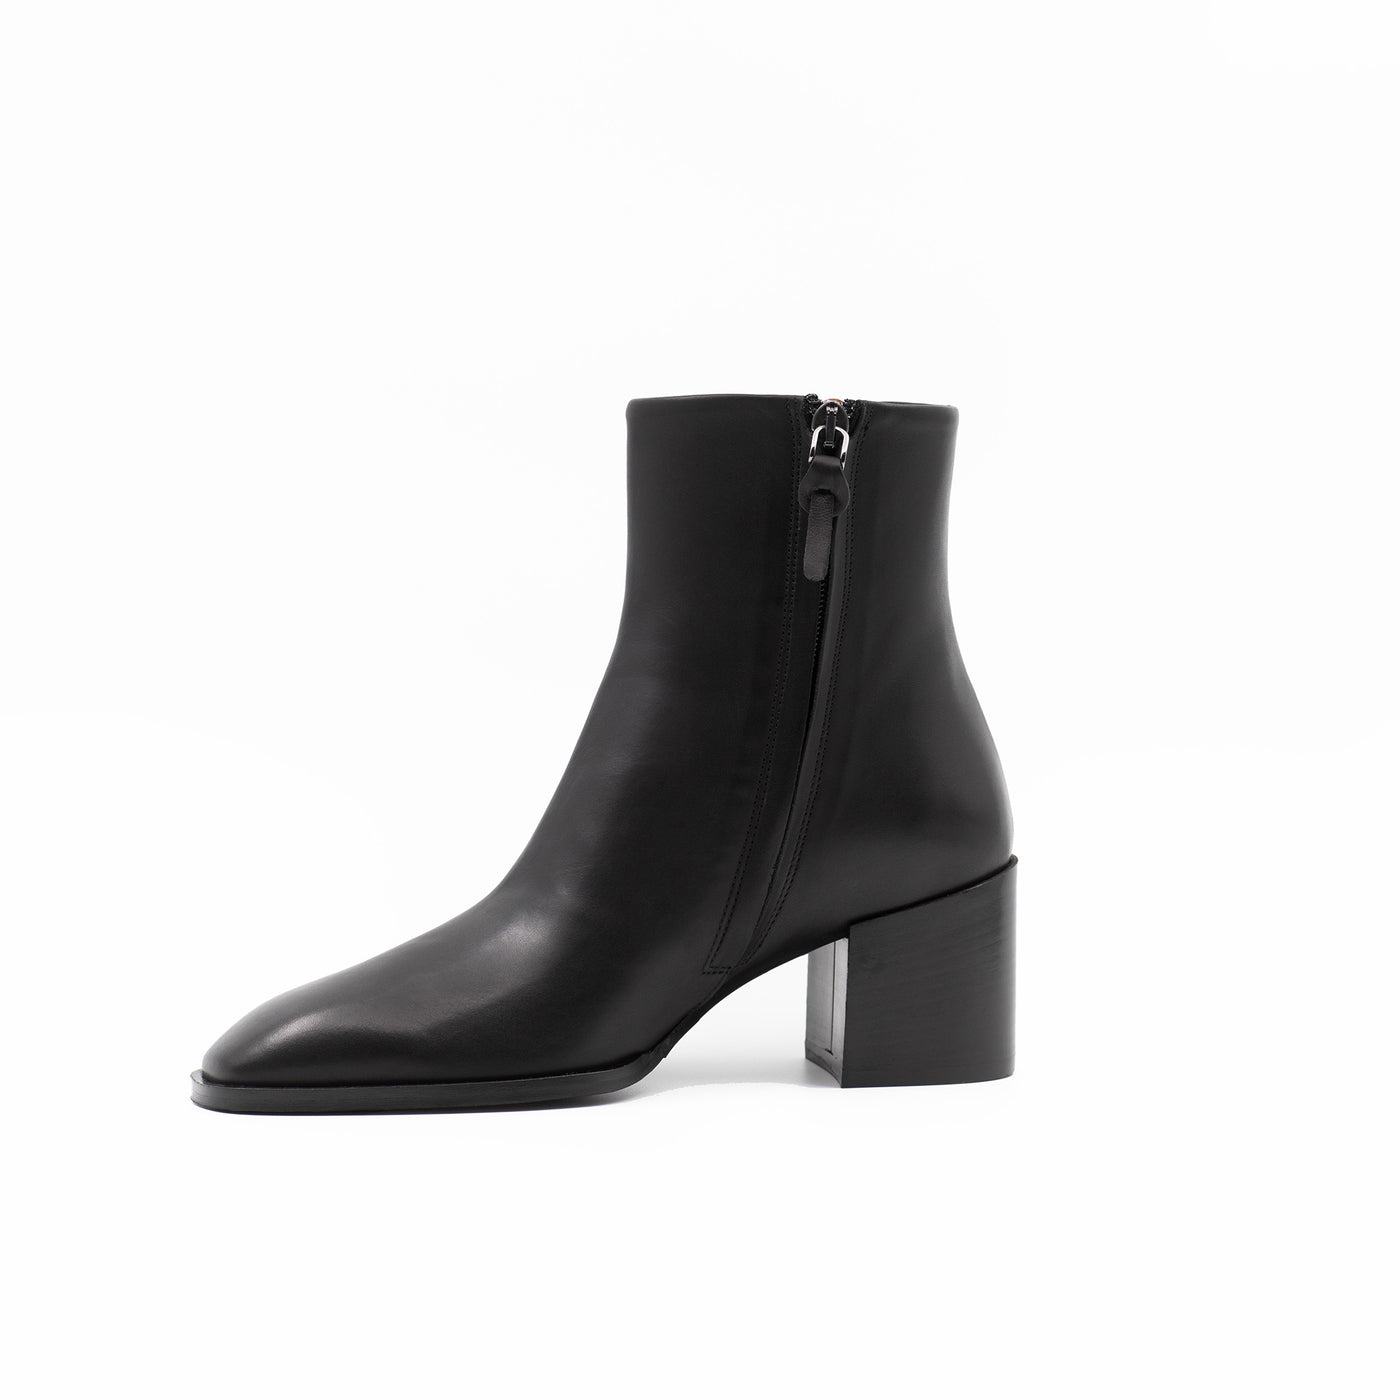 Block heeled ankle boot in black leather with zip on the side